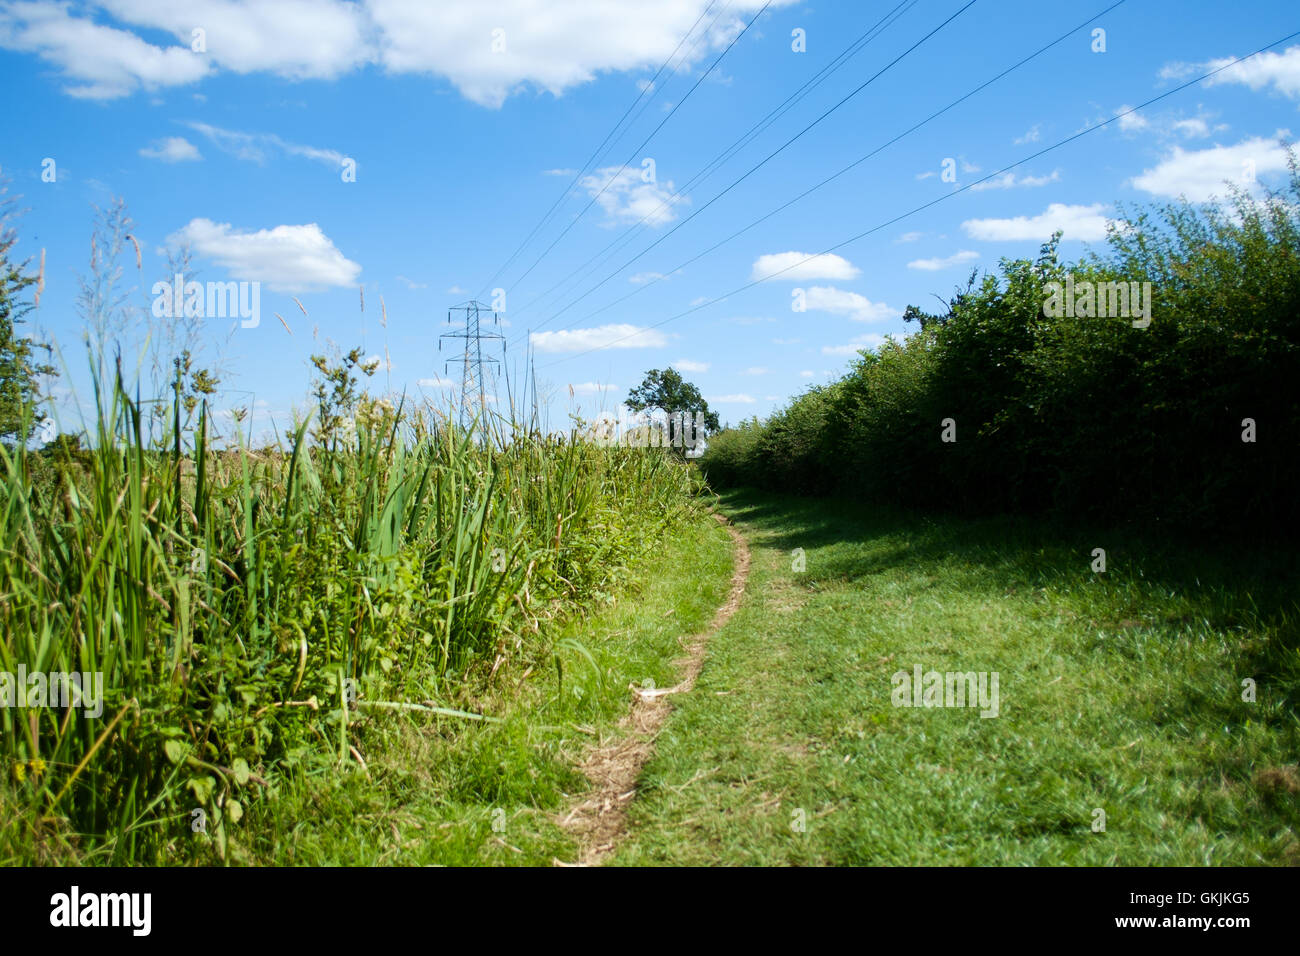 Electricity pylon in countryside on summer day, East Midlands, England Stock Photo